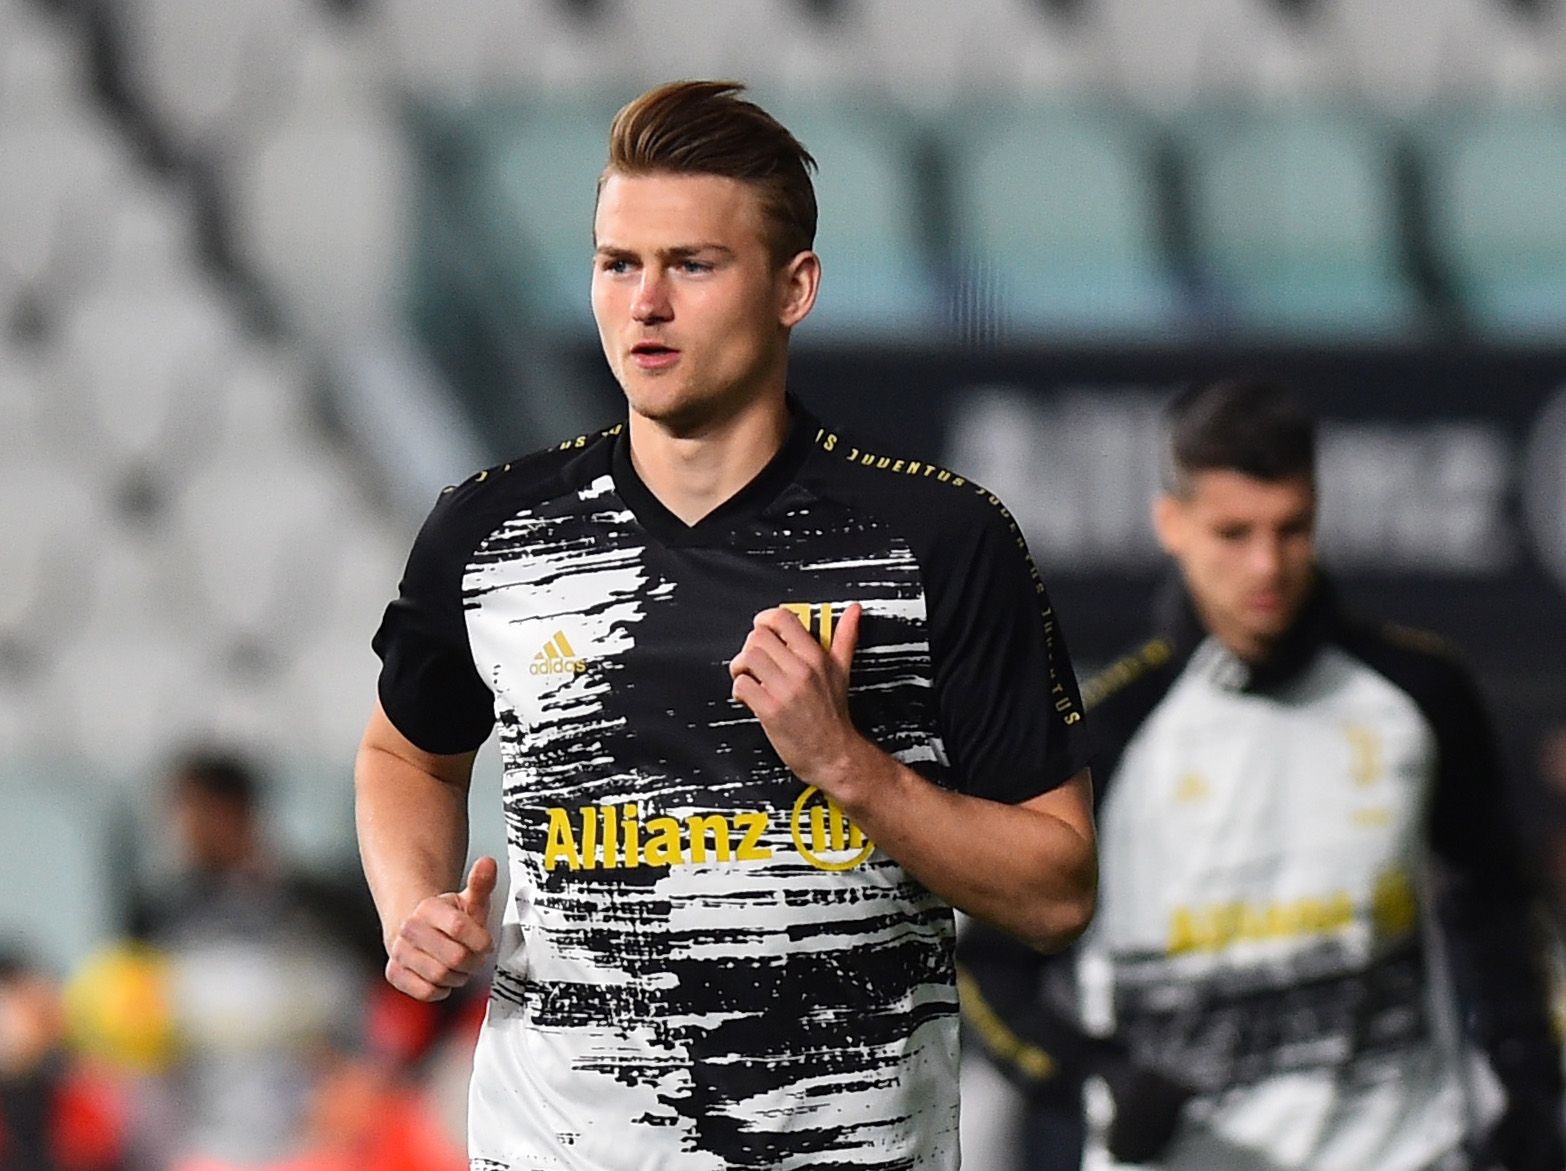 Soccer Football - Serie A - Juventus v Cagliari - Allianz Stadium, Turin, Italy - November 21, 2020 Juventus' Matthijs de Ligt during the warm up before the match REUTERS/Massimo Pinca